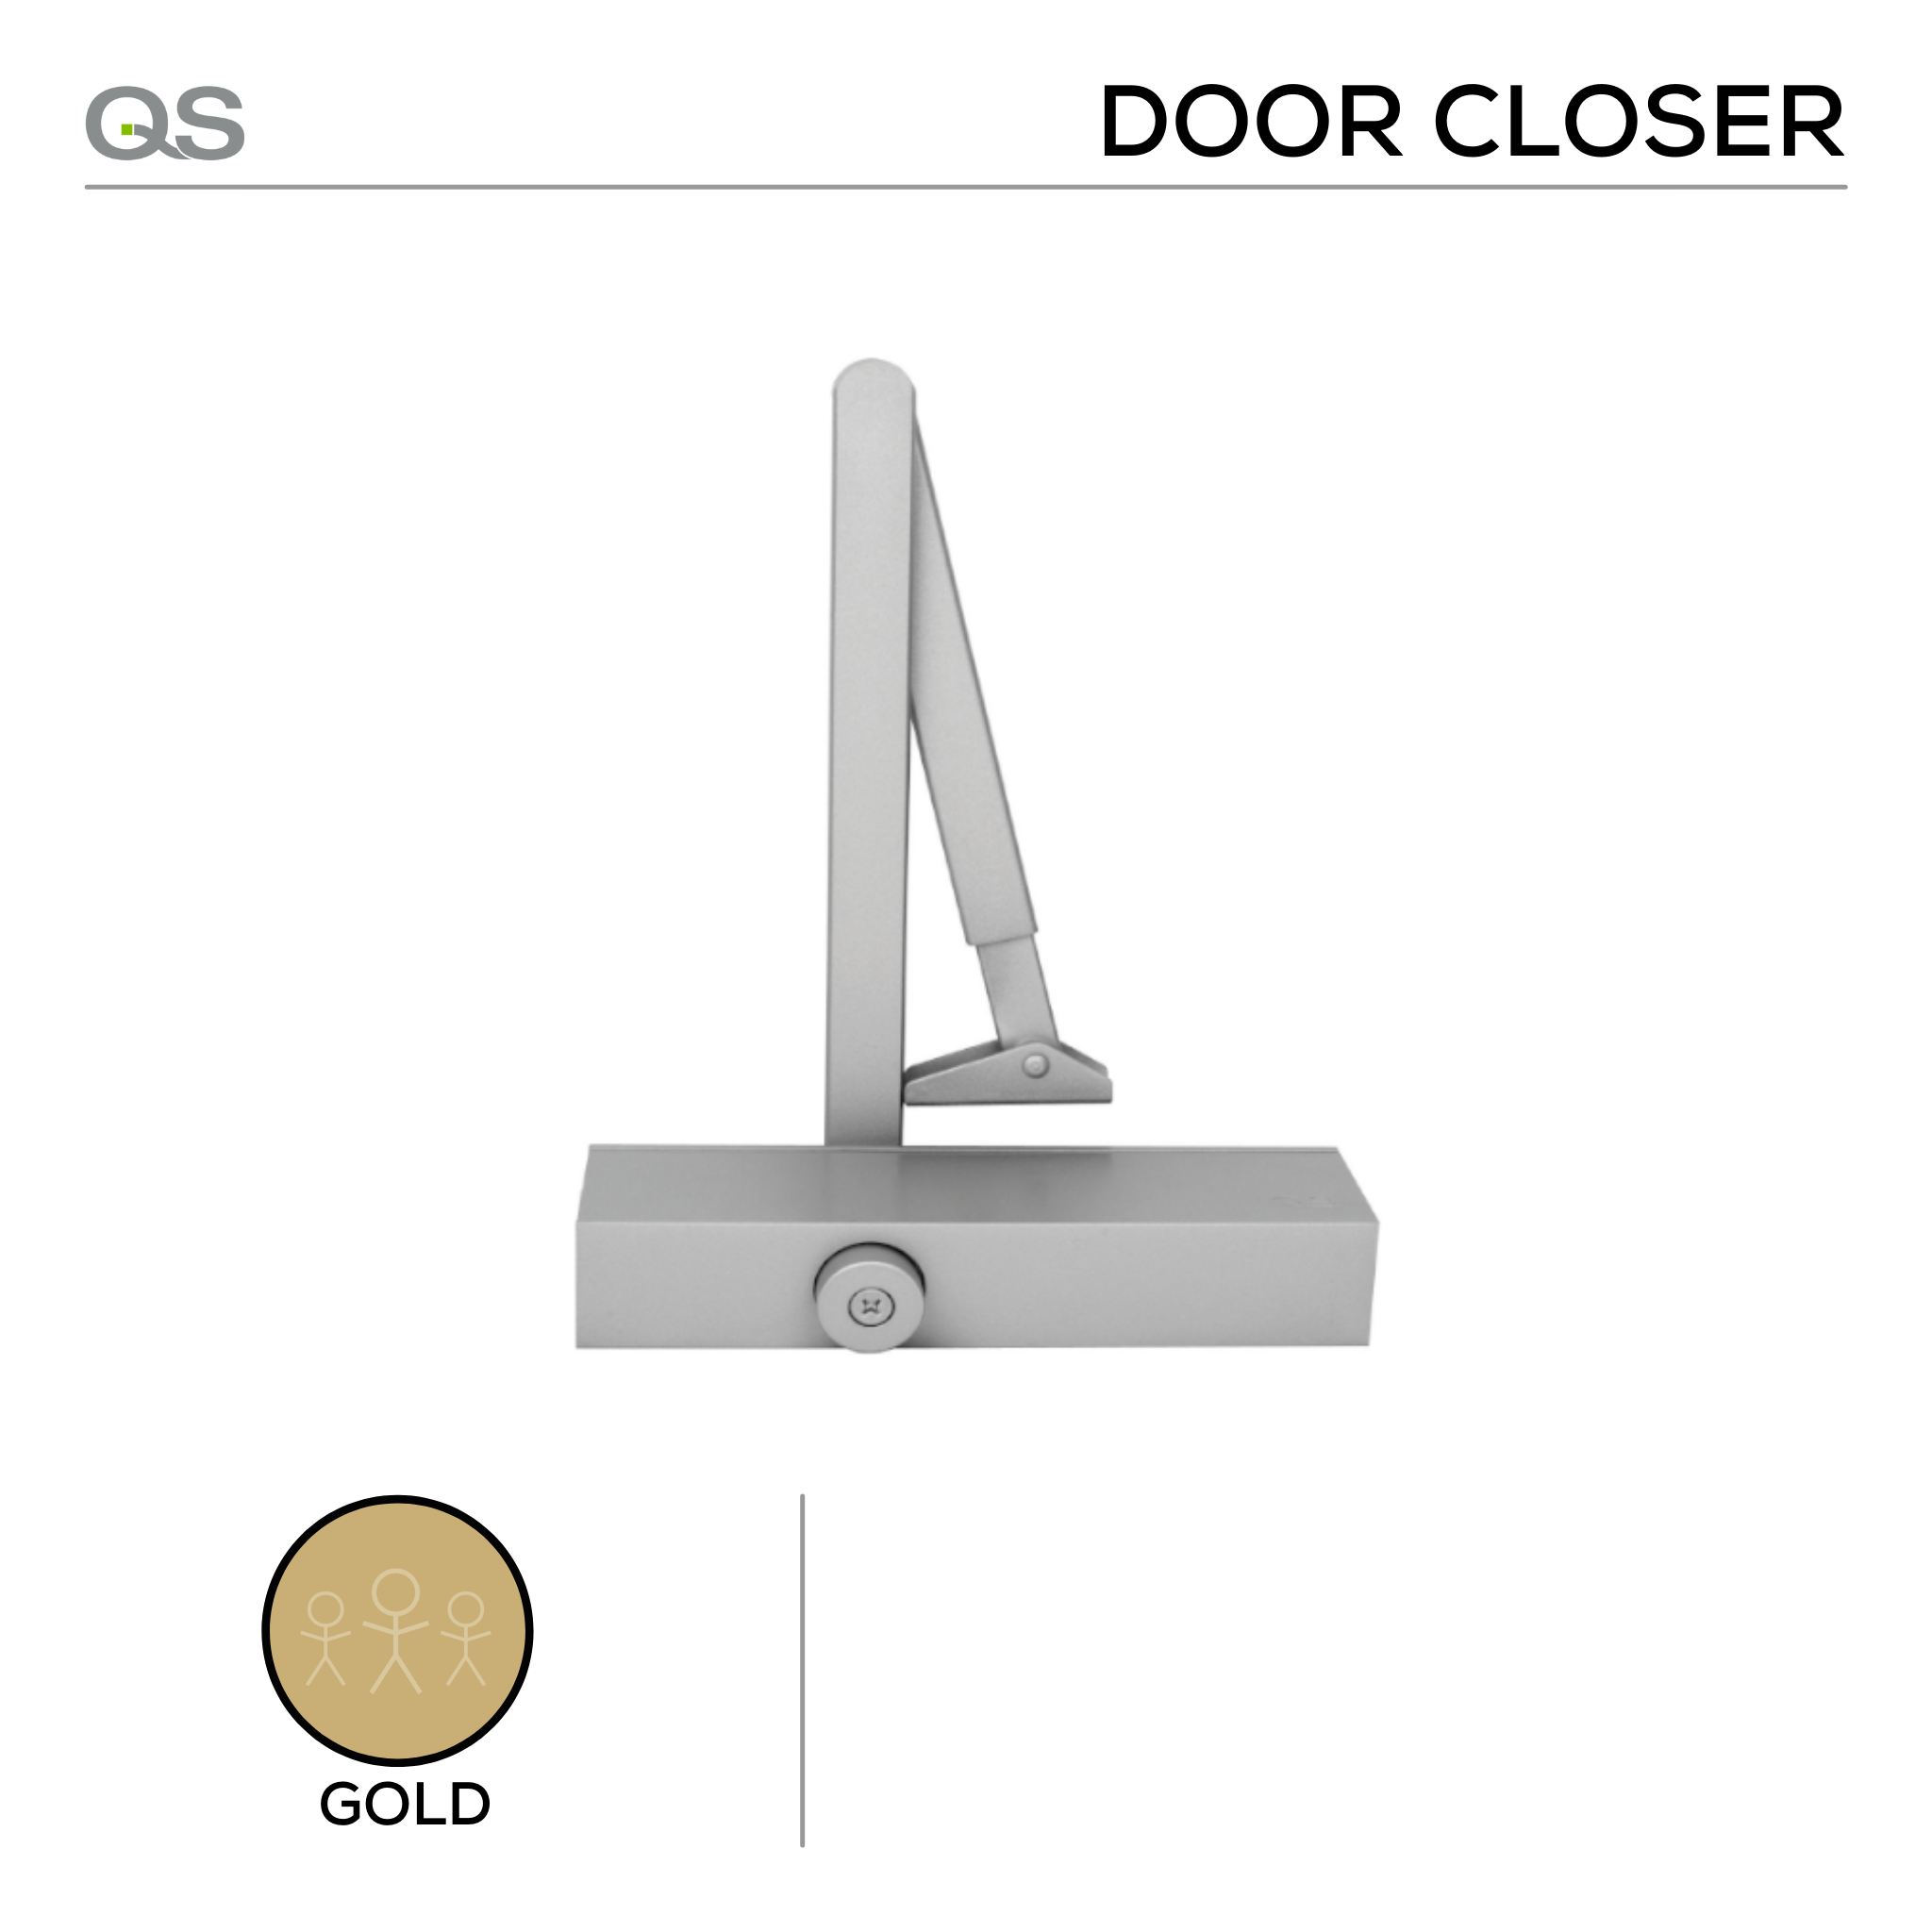 QS750 EN1154 Fire Rated, Size 2-5, Adjustable with Designer Arm, Gold, QS